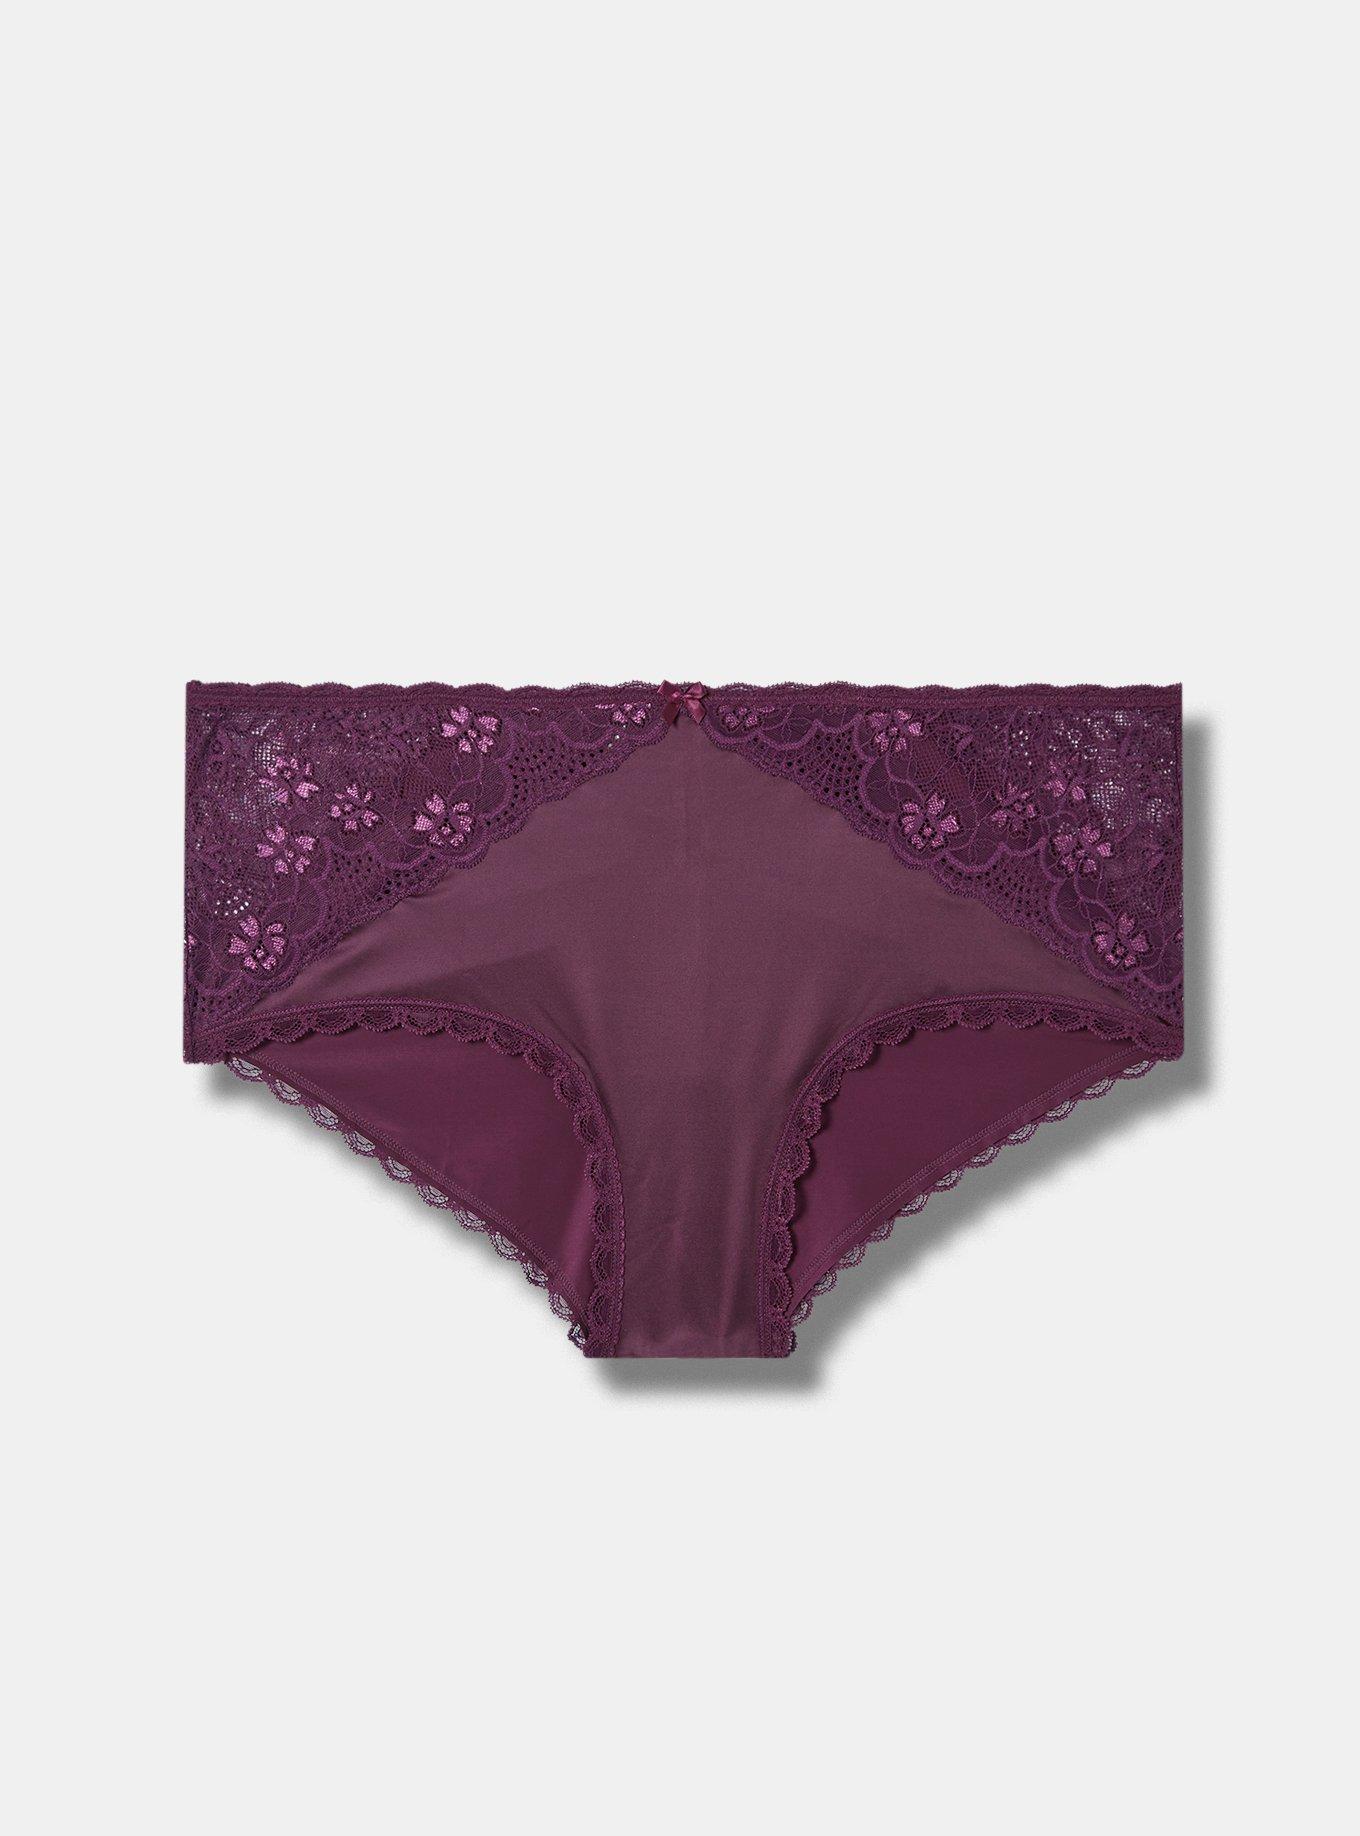 Buy Victoria's Secret PINK Pink Plum Shine Cheeky Cotton Knickers